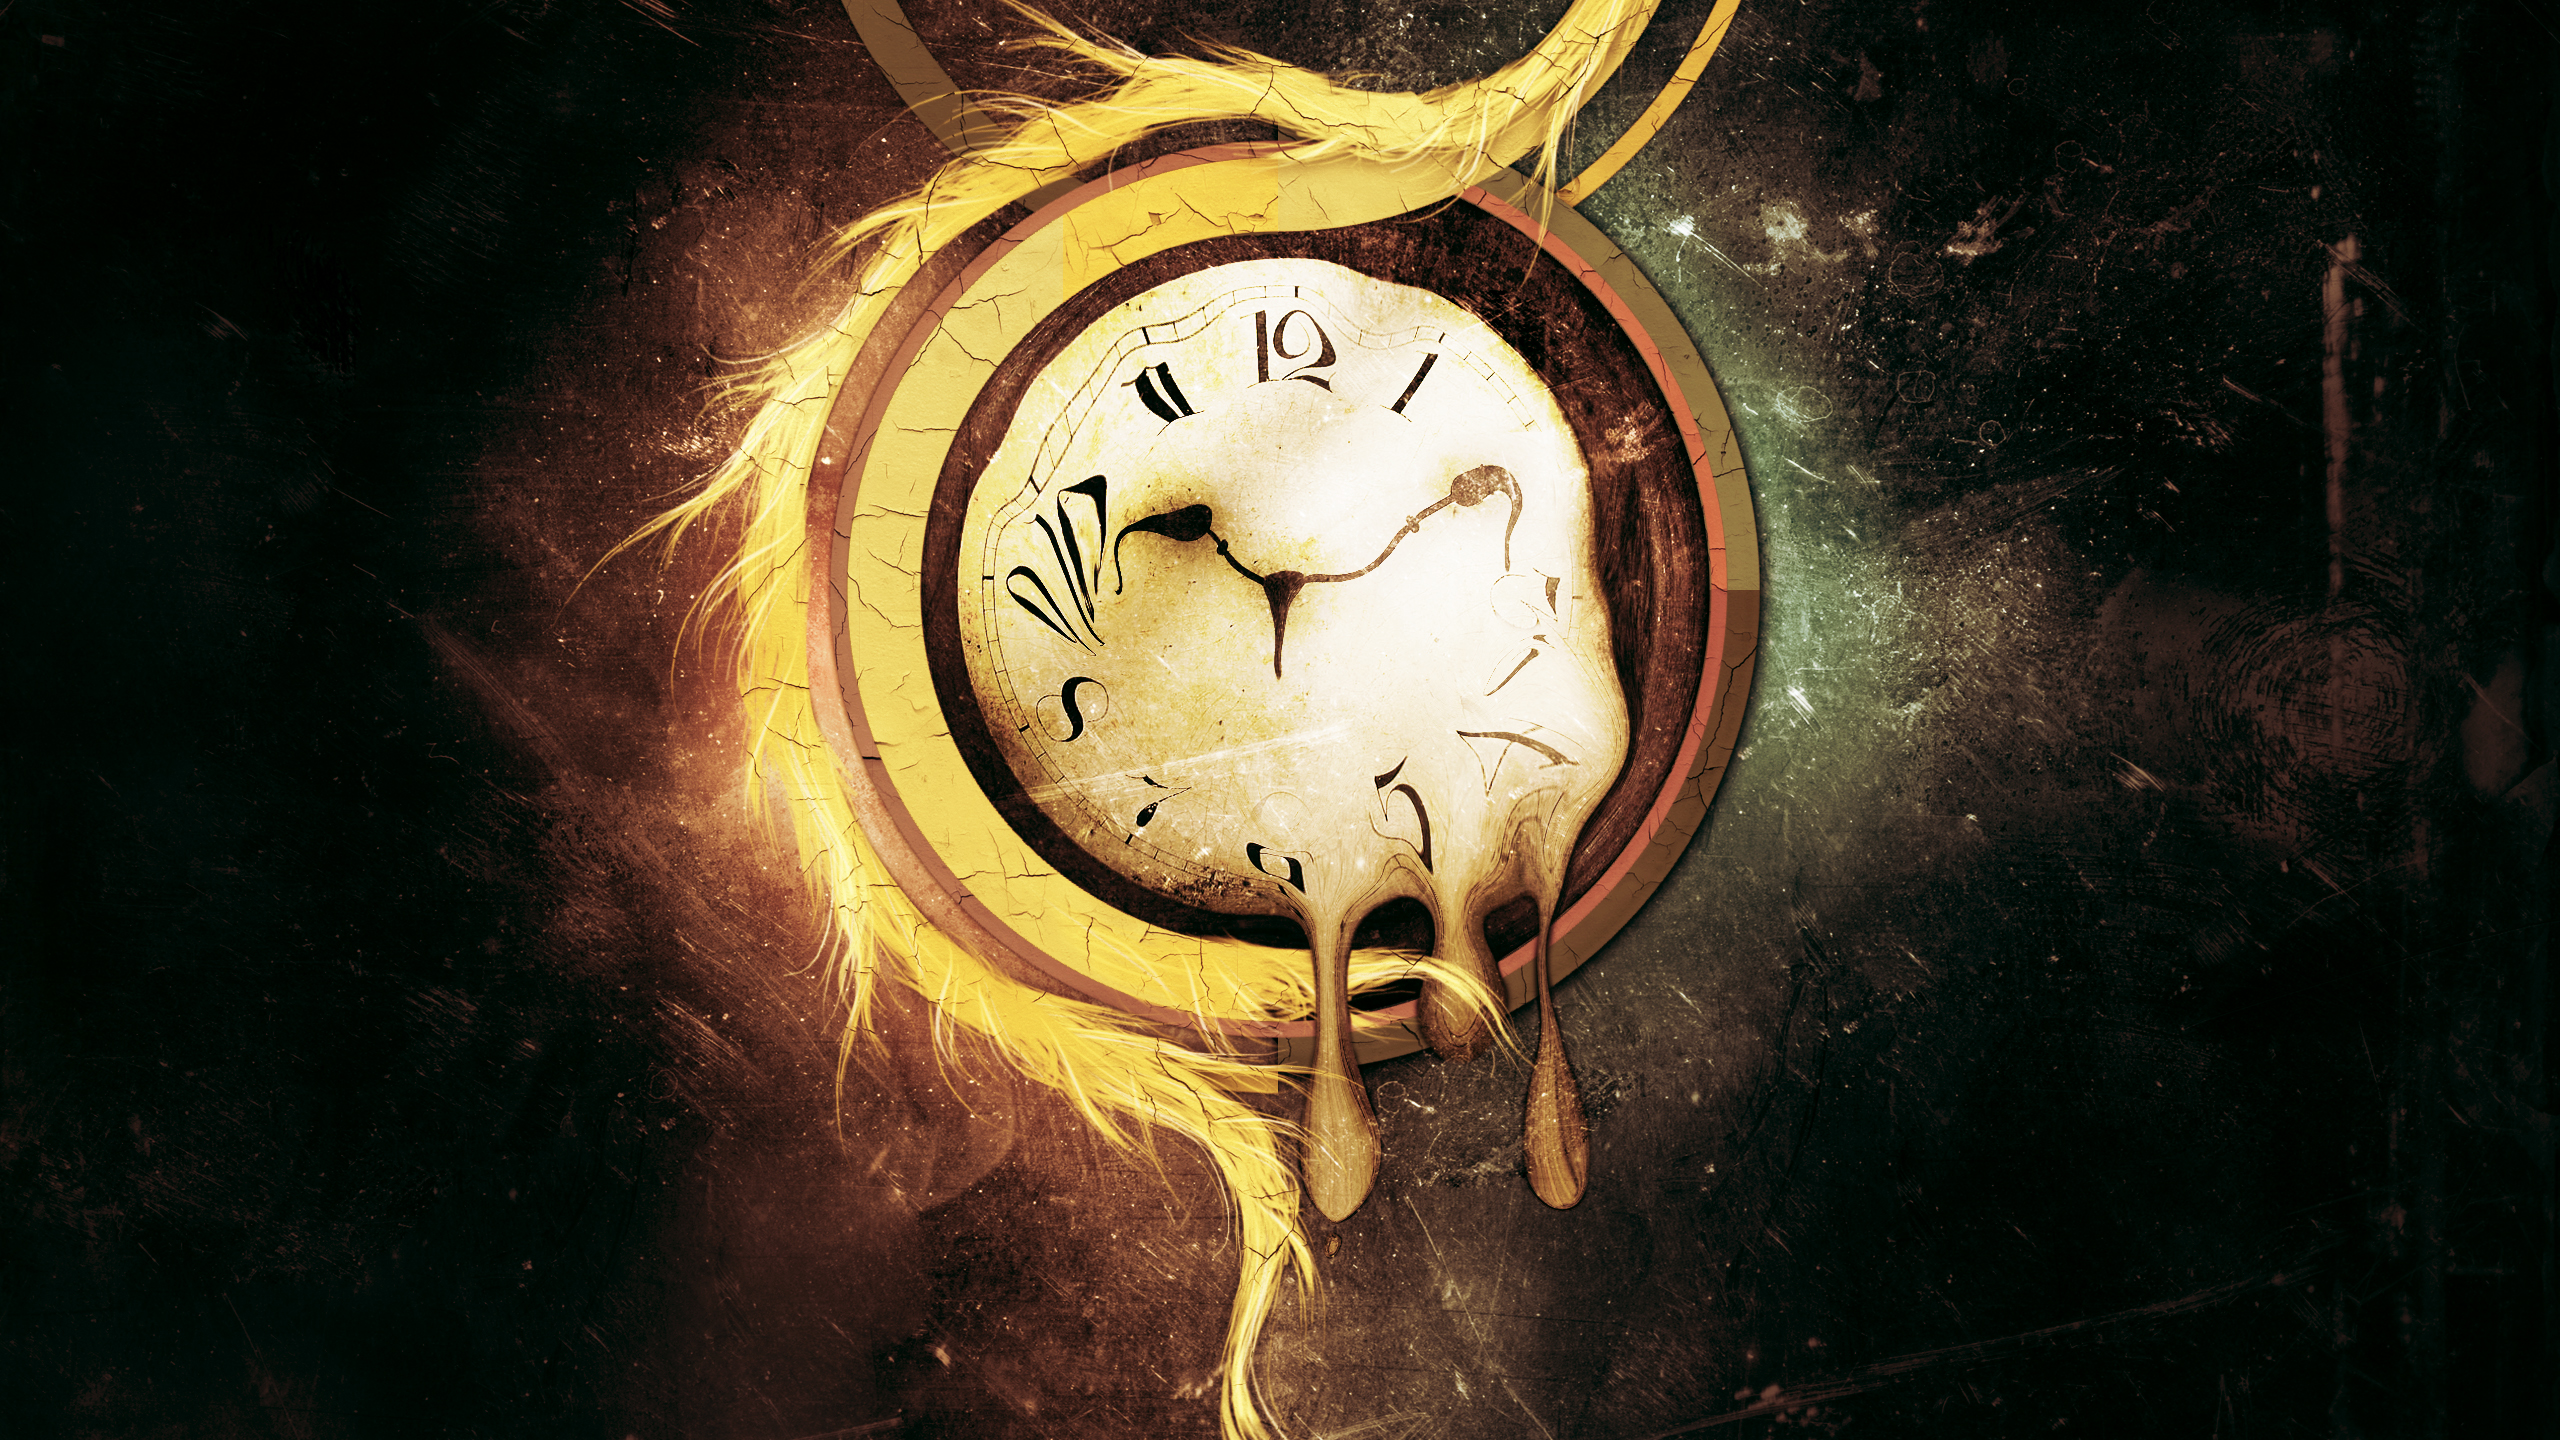 abstract, Artistic, Clocks, Surrealism, Surreal, Psychedelic, Time Wallpaper